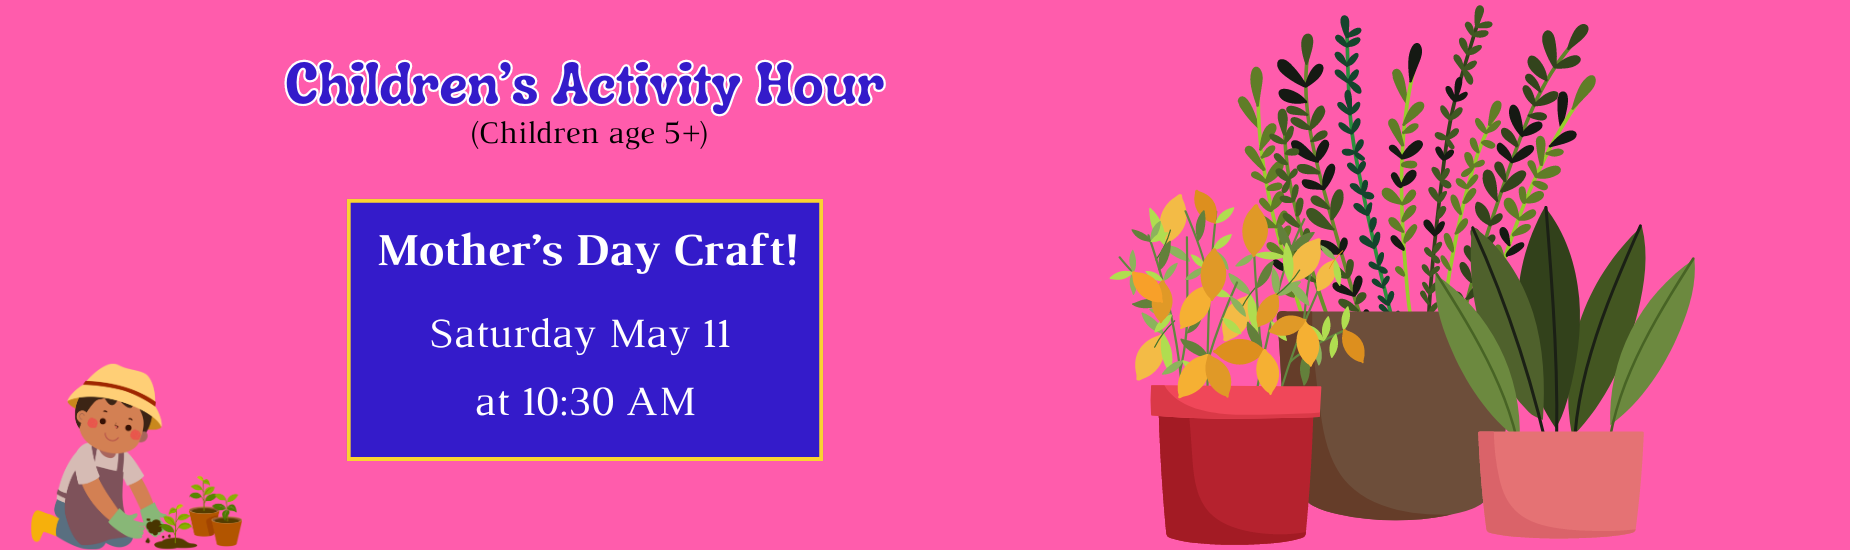 Mother's Day children's activity Saturday May 11